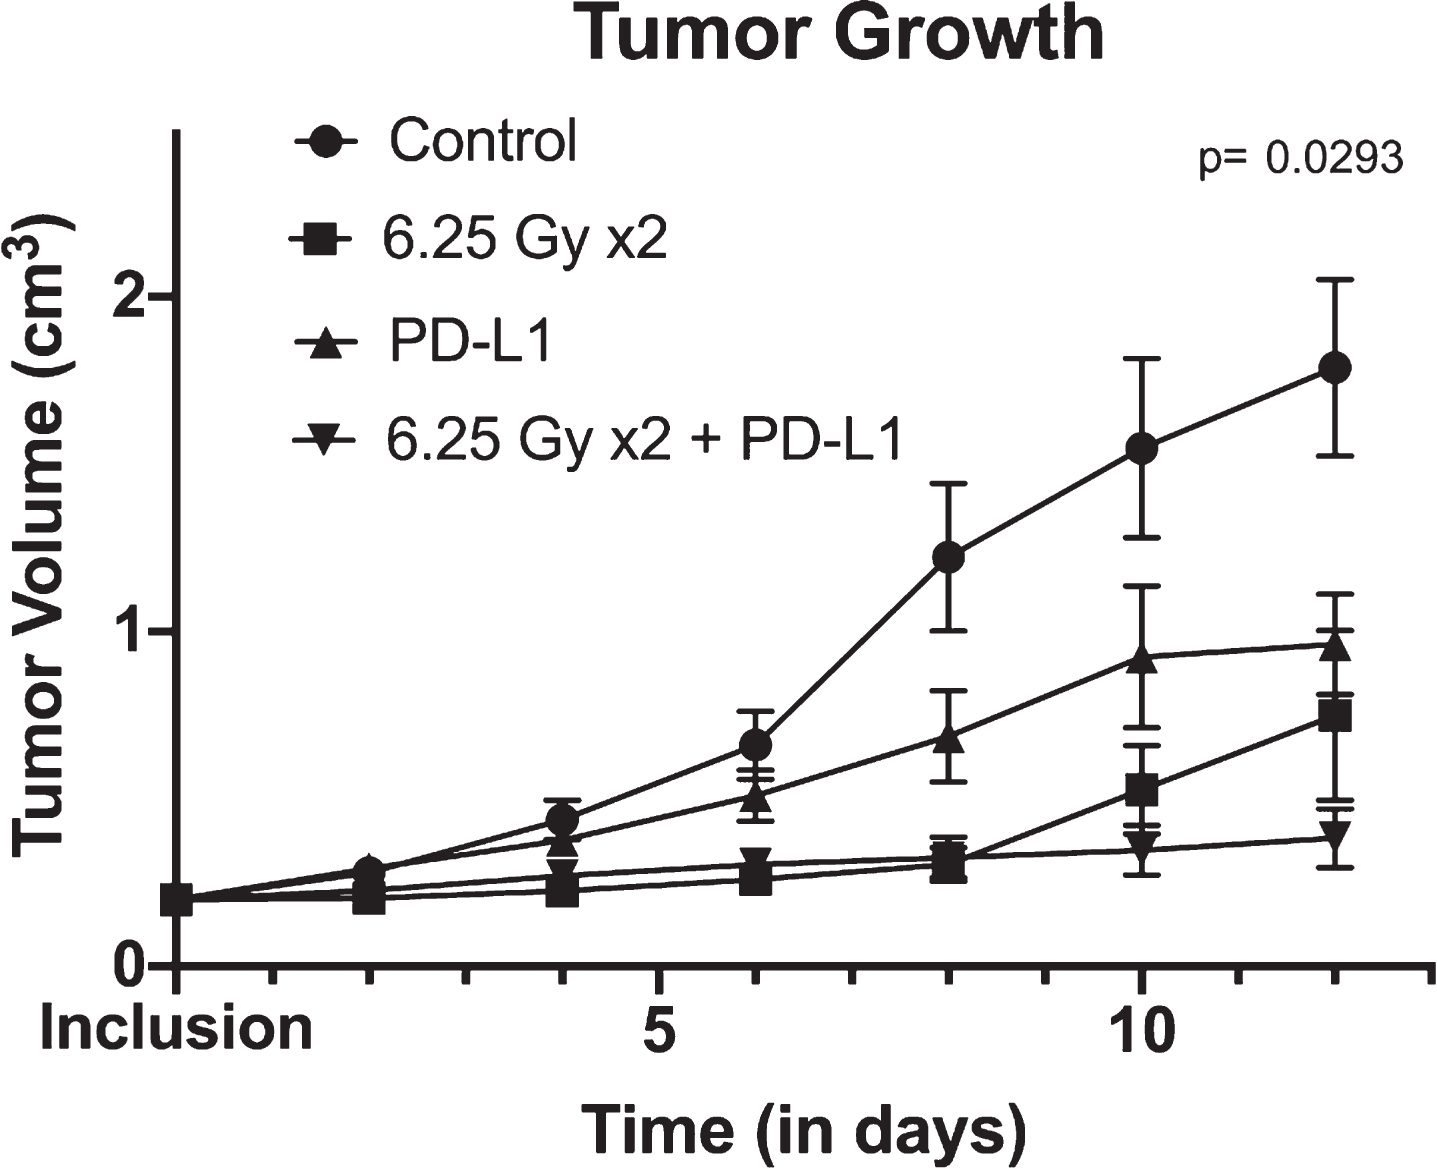 Tumor growth over time between control, XRT (radiotherapy) alone, anti-PD-L1 alone and combination therapy (consisting of concurrent anti-PD-L1 and XRT) arms. Tumor growth is shown using mean and standard errors for each group at each time points. Analysis of variance revealed significant differences between arms (p = 0.0293).